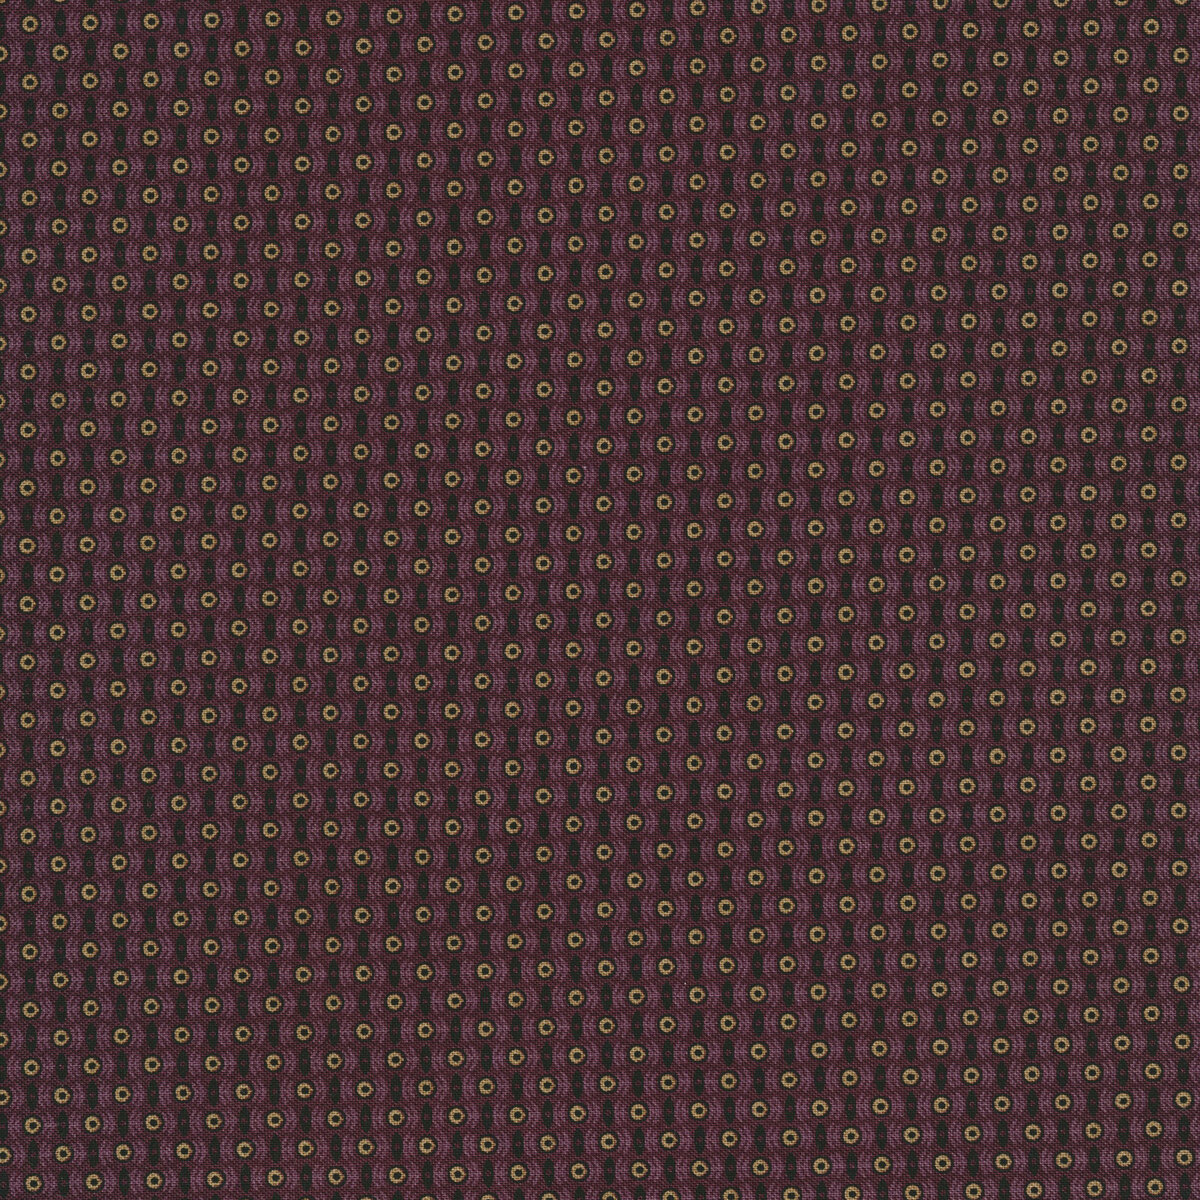 LV Inspired Fabric By the Yard or Half Yard, Designer Inspired Fabric LV